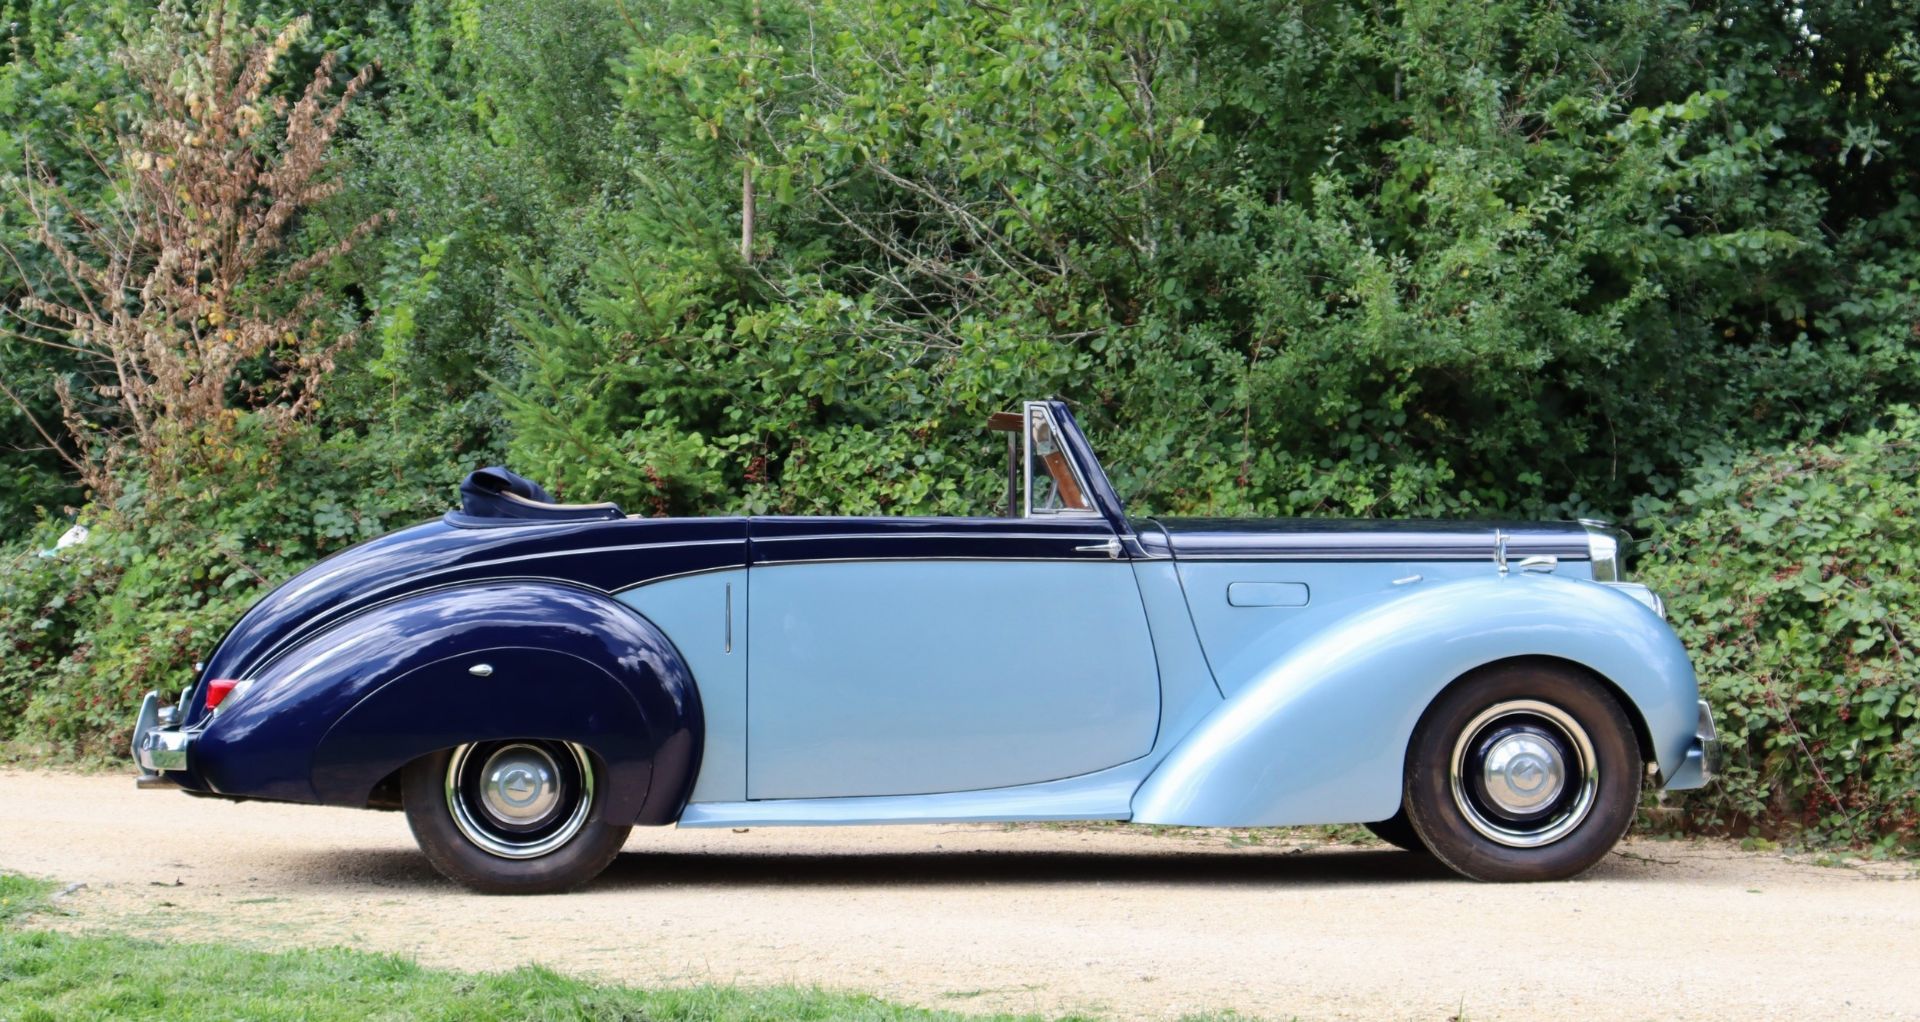 1952 ALVIS TA21 THREE-POSITION DROPHEAD COUPE Registration Number: HUJ 259 Chassis Number: 24489 - Image 12 of 44